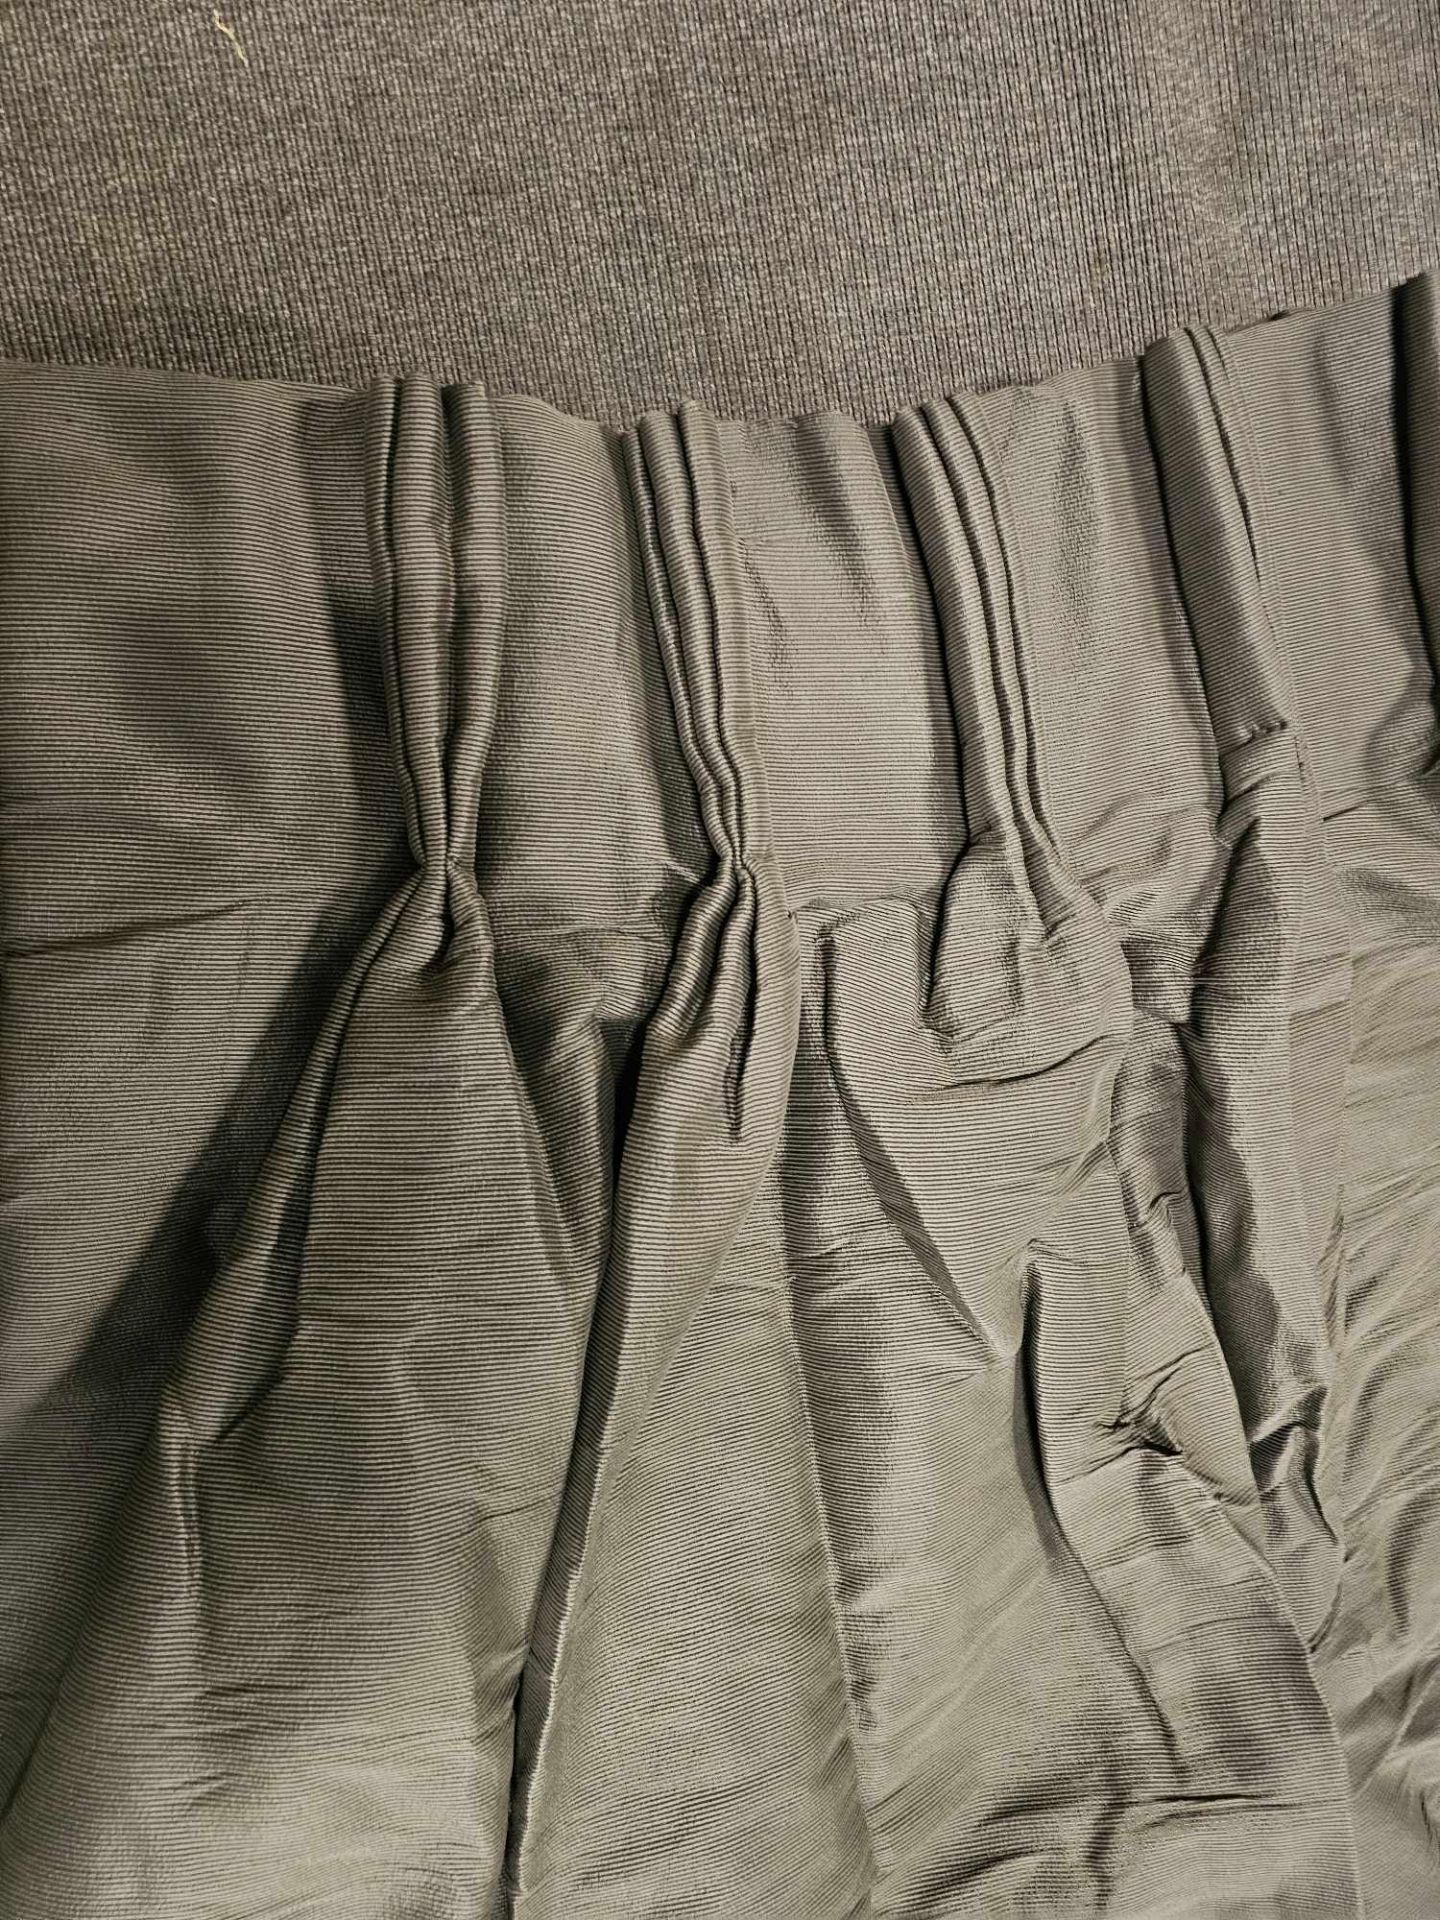 Pair Of Dark Green Lined Curtains Size 148 x 260cm ( Ref Dorchspa 103) - Image 2 of 3